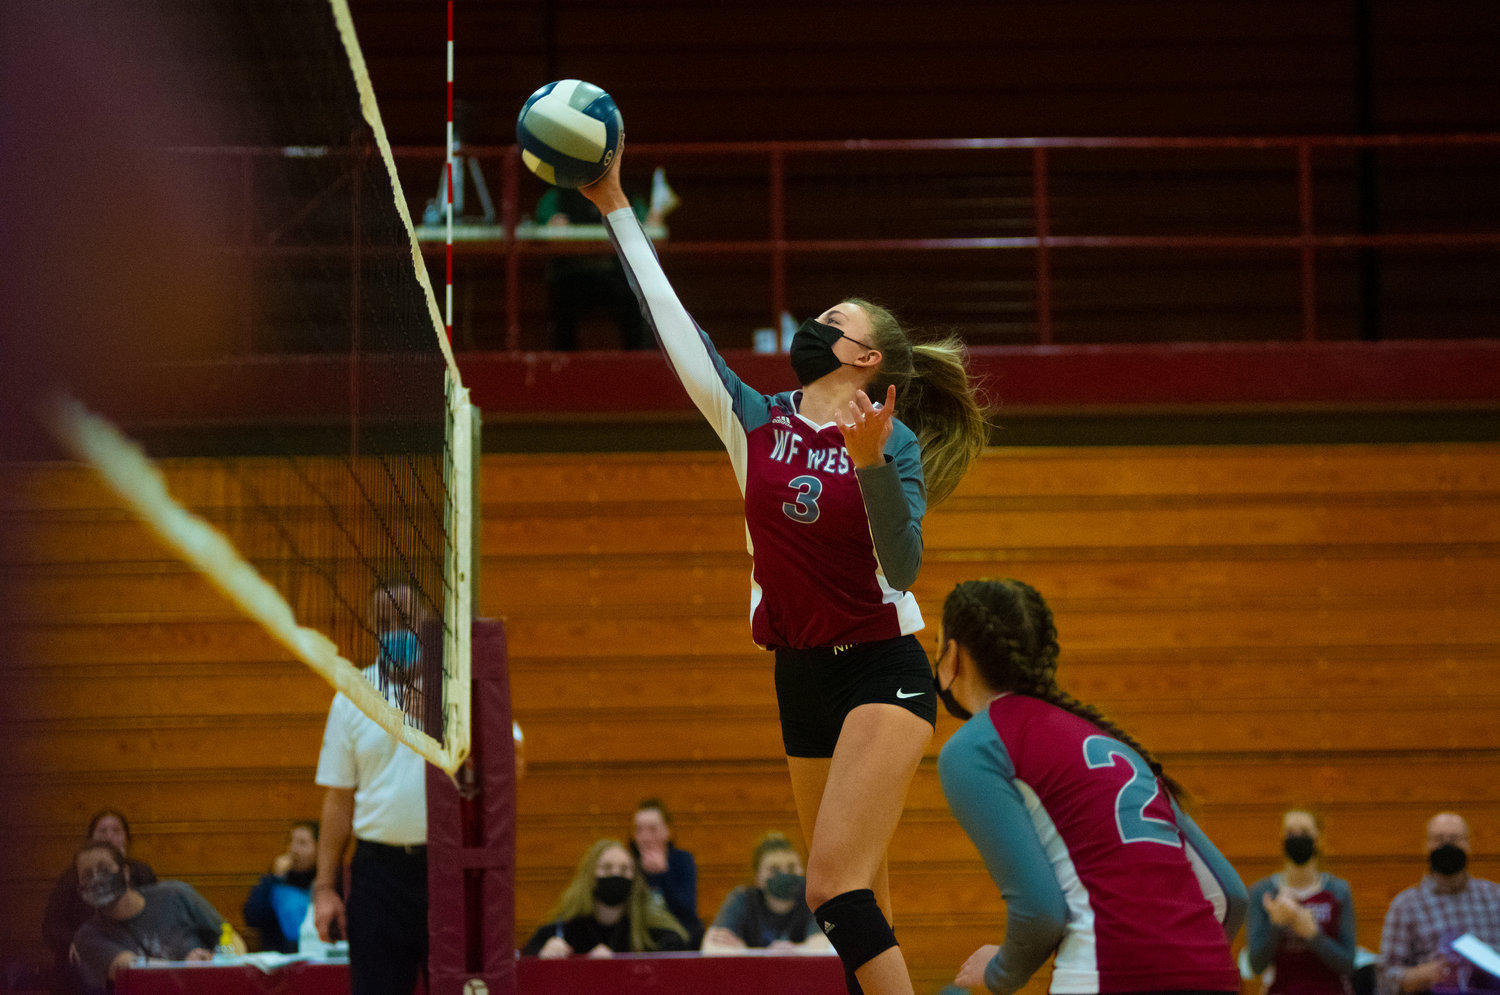 W.F. West's Amelia Etue sends the ball back over the net against Aberdeen Thursday.